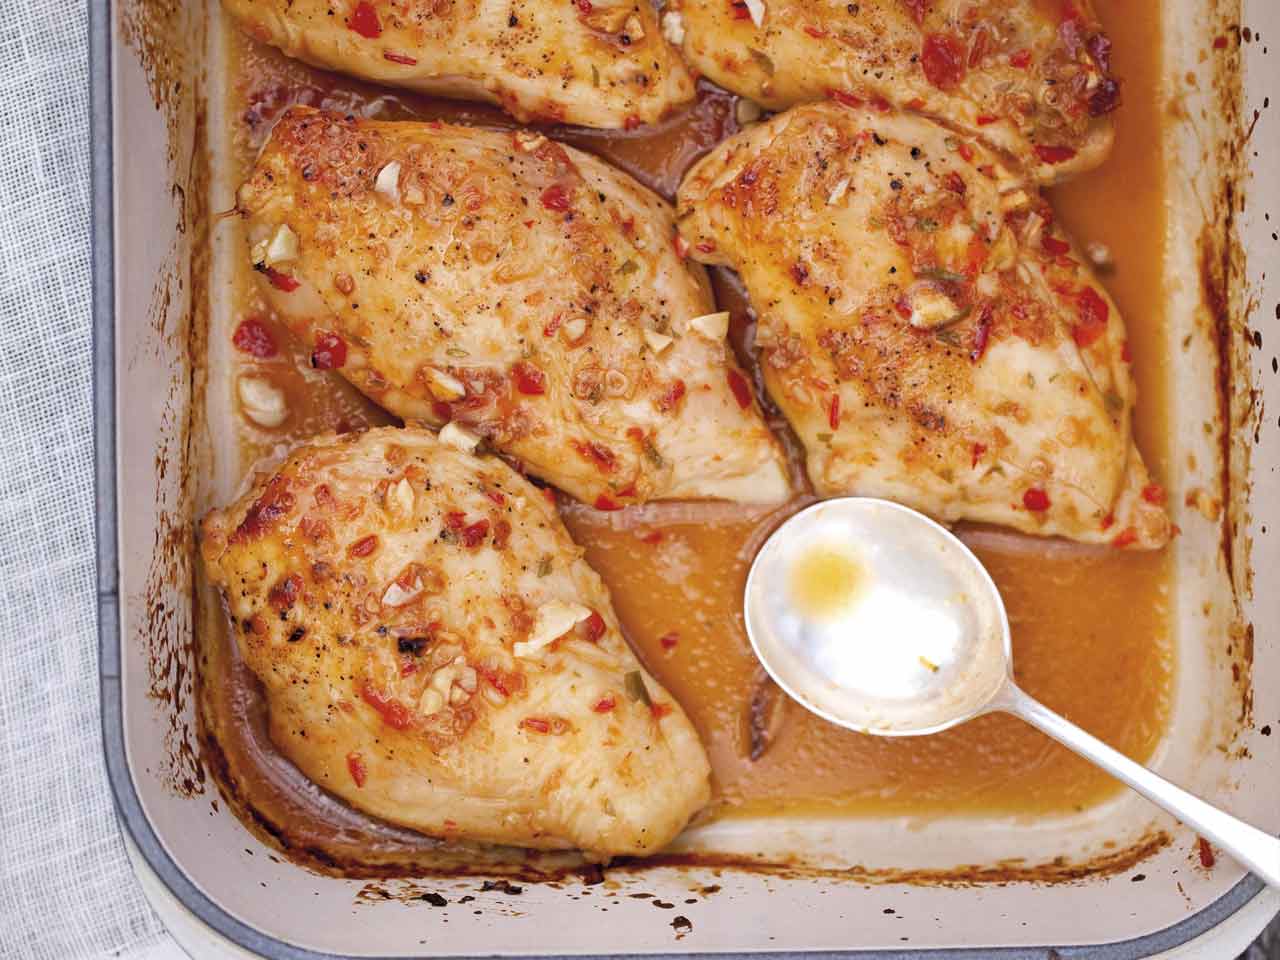 Annabel Langbein's baked chicken with chilli and lemongrass